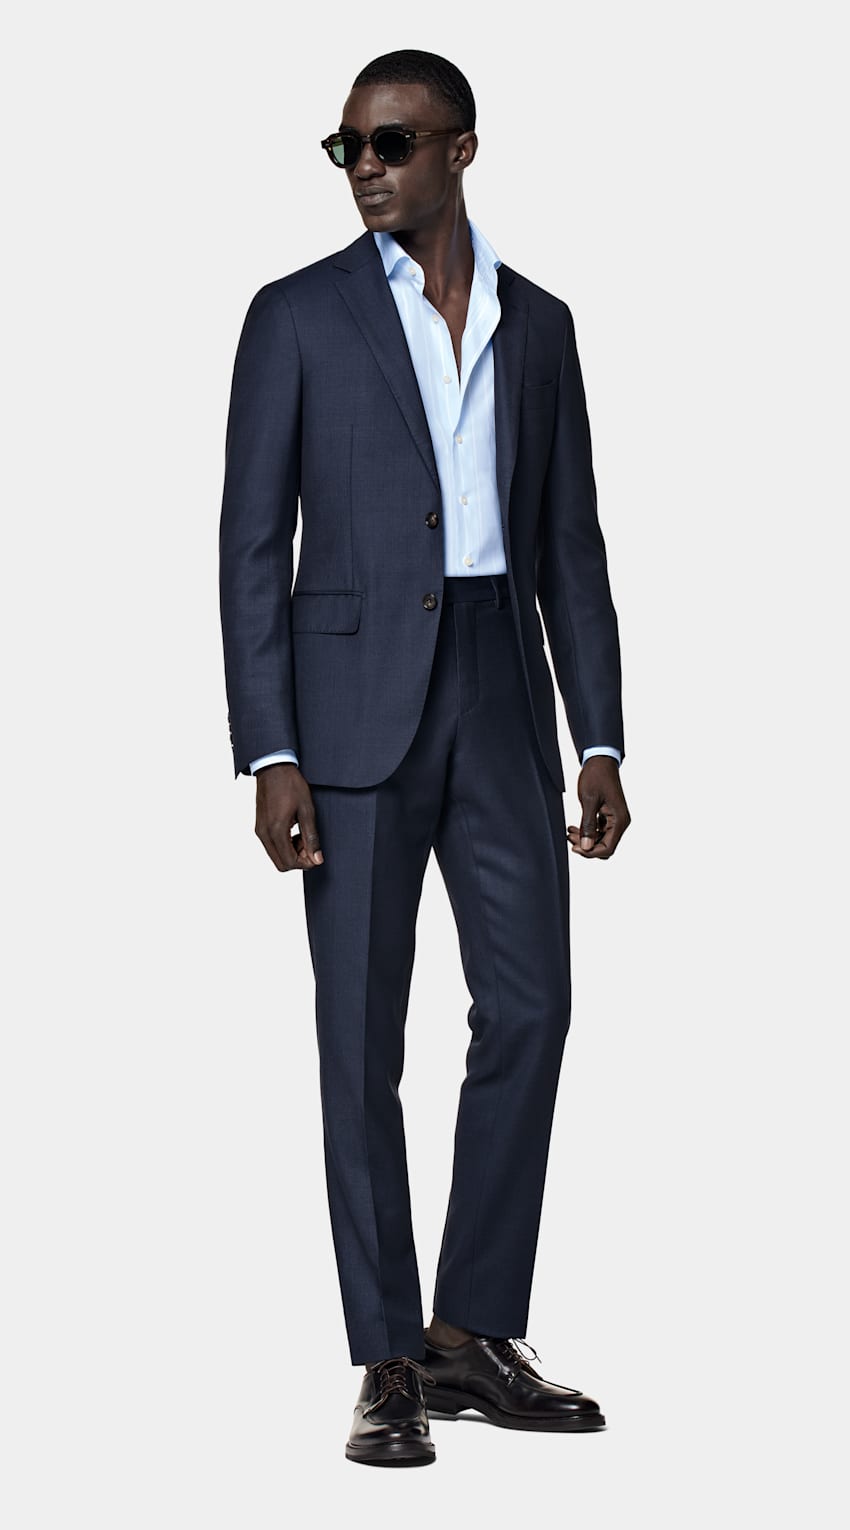 SUITSUPPLY Pure Wool S130's by Vitale Barberis Canonico, Italy Blue Bird's Eye Sienna Suit